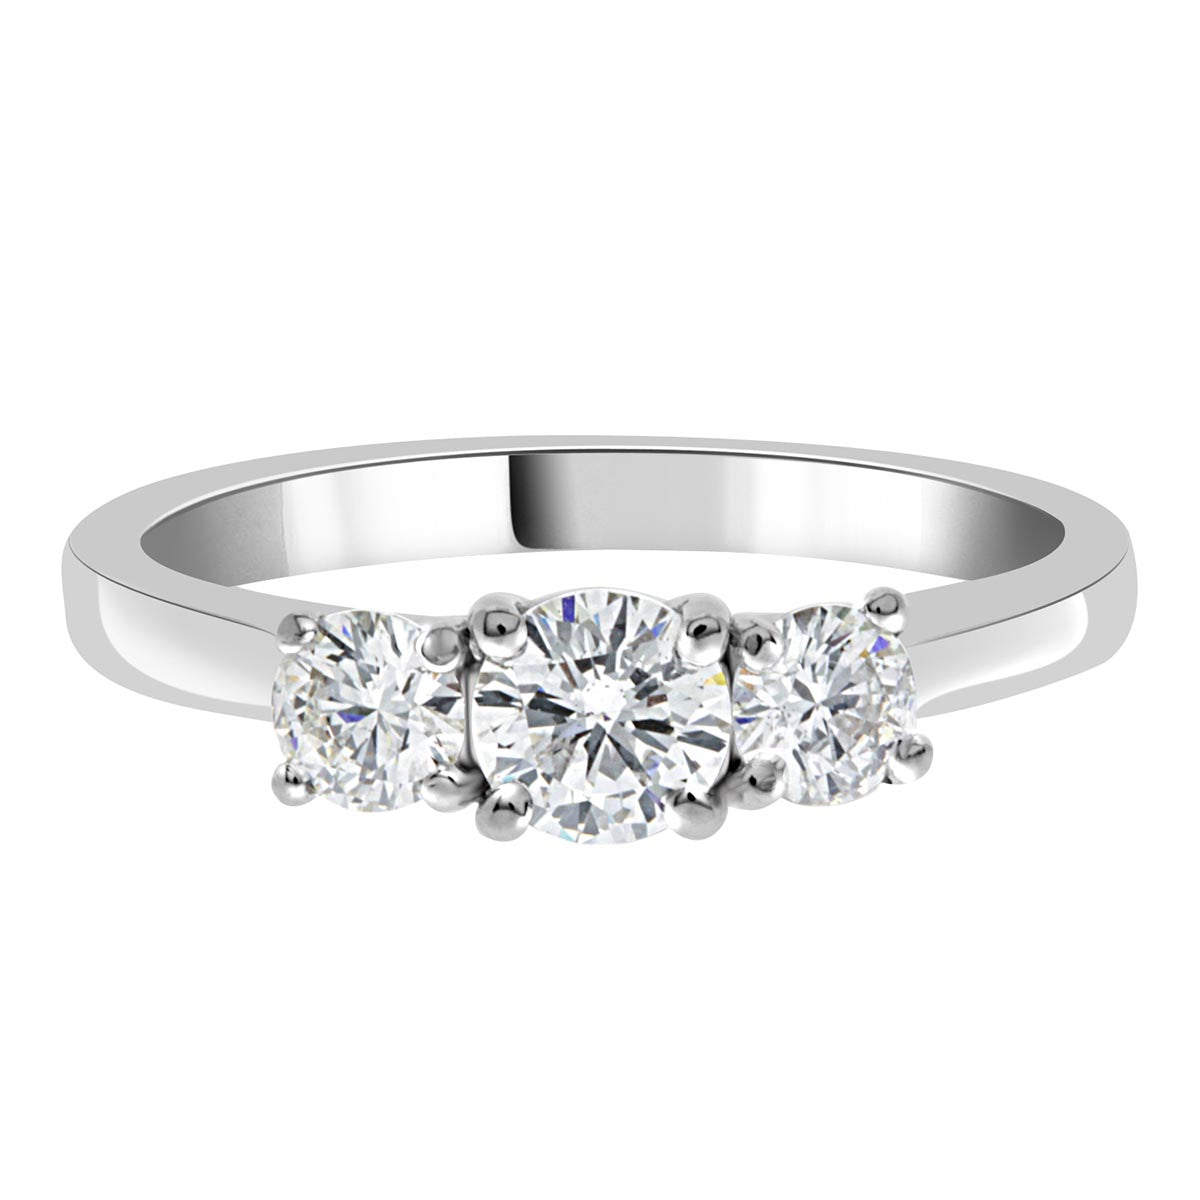 Trilogy Engagement Ring made in platinum